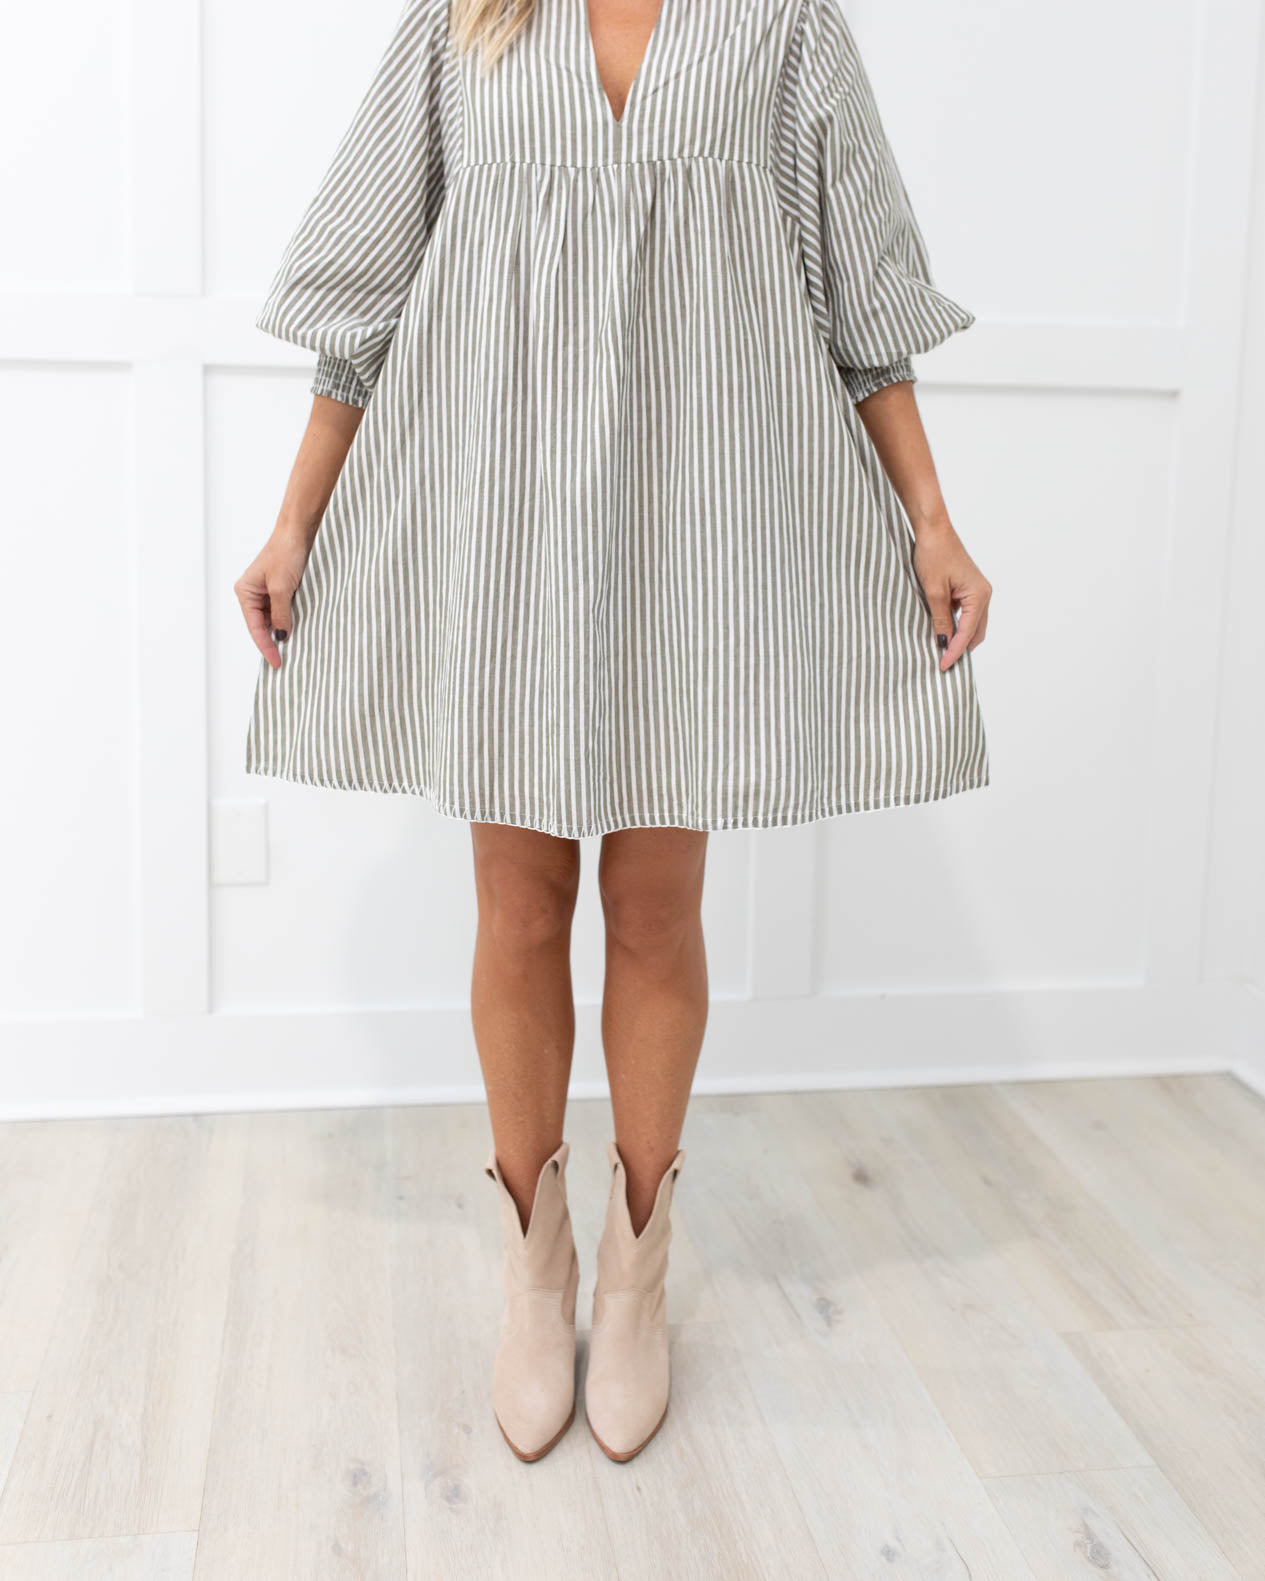 Carter Dress in Olive and White Stripe